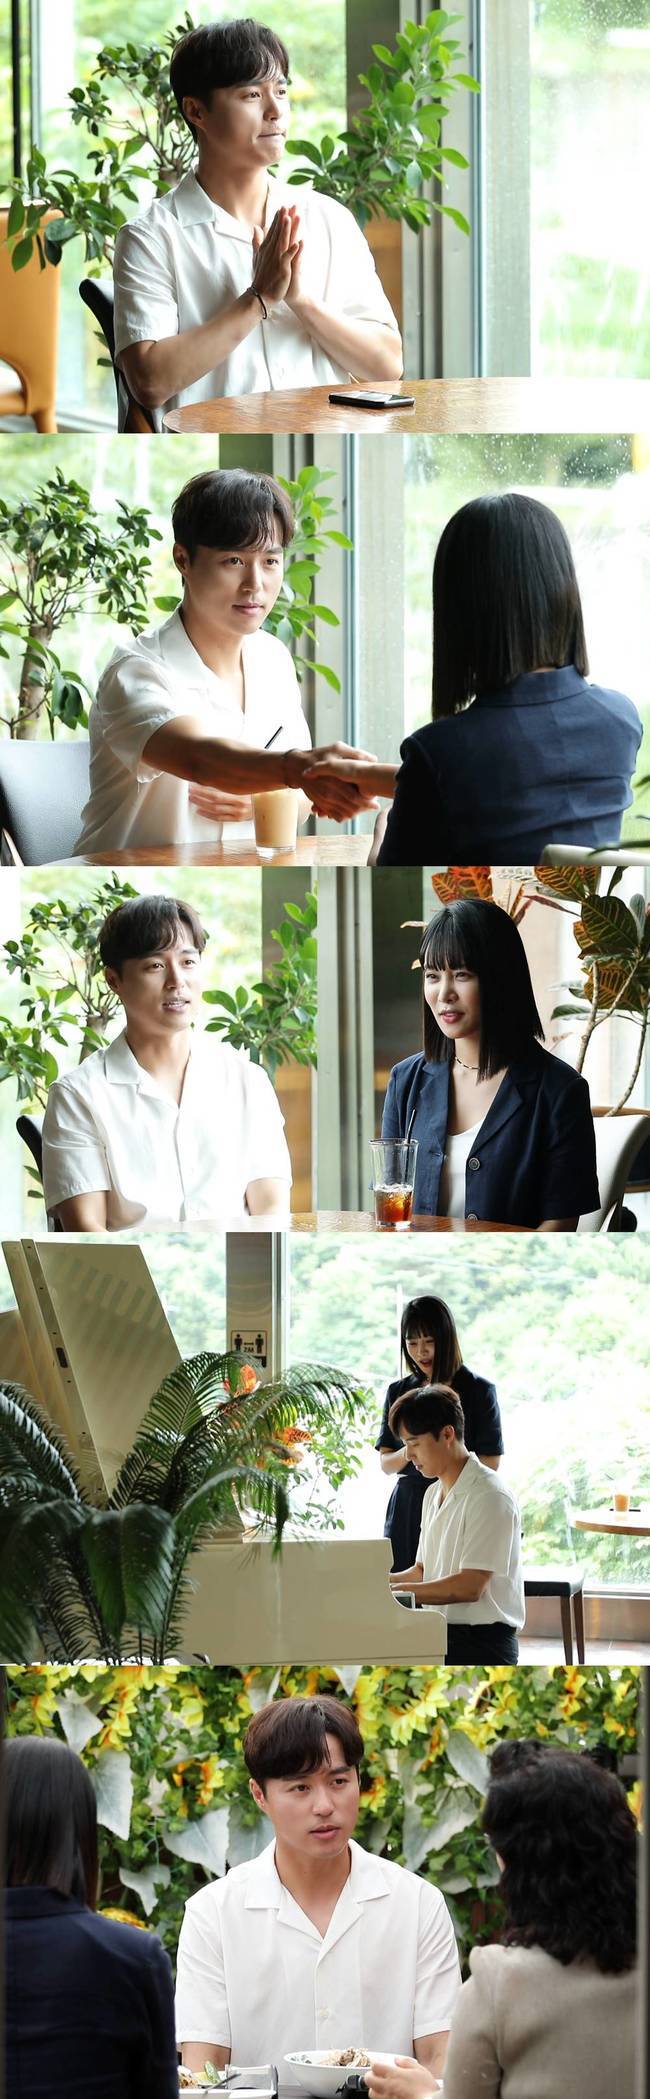 Actor Oh Min-Seoks blind date scene is revealedOh Min-seok, who was introduced to Kim Jun-ho in the recent SBS My Little Old Boy recording, showed a nervous appearance from the beginning.After a while, when a beautiful woman appeared, the studio was also excited to say, Are you really dating?At first, it was an awkward atmosphere, but soon it created a pink atmosphere by discovering the commonality of the person who fits the laughing code well.In particular, I was enthusiastically cheering them for the appearance of the blind dater who is actively approaching Minseok, and the people who watch him feel the surrogate excitement and hope that he will be good.Min Seok played the piano in the cafe directly at the end of the blind date who liked the piano, and the blind dater made the studio laugh with unexpected answers.On the other hand, in the car heading to the home-style white house recommended by the blind dater, the title of brother was arranged and added to the expectation by creating a closer atmosphere.And where I arrived, the woman of the tomb welcomed them, and Min Seok, the official dance dancer of My Little Old Boy, wondered that there was a situation where they danced in front of them on the first day of the blind date.Whether Minseoks blind date can develop into a pink romance, the full-blown blind date scene can be seen on September 5 at 9:05 pm.